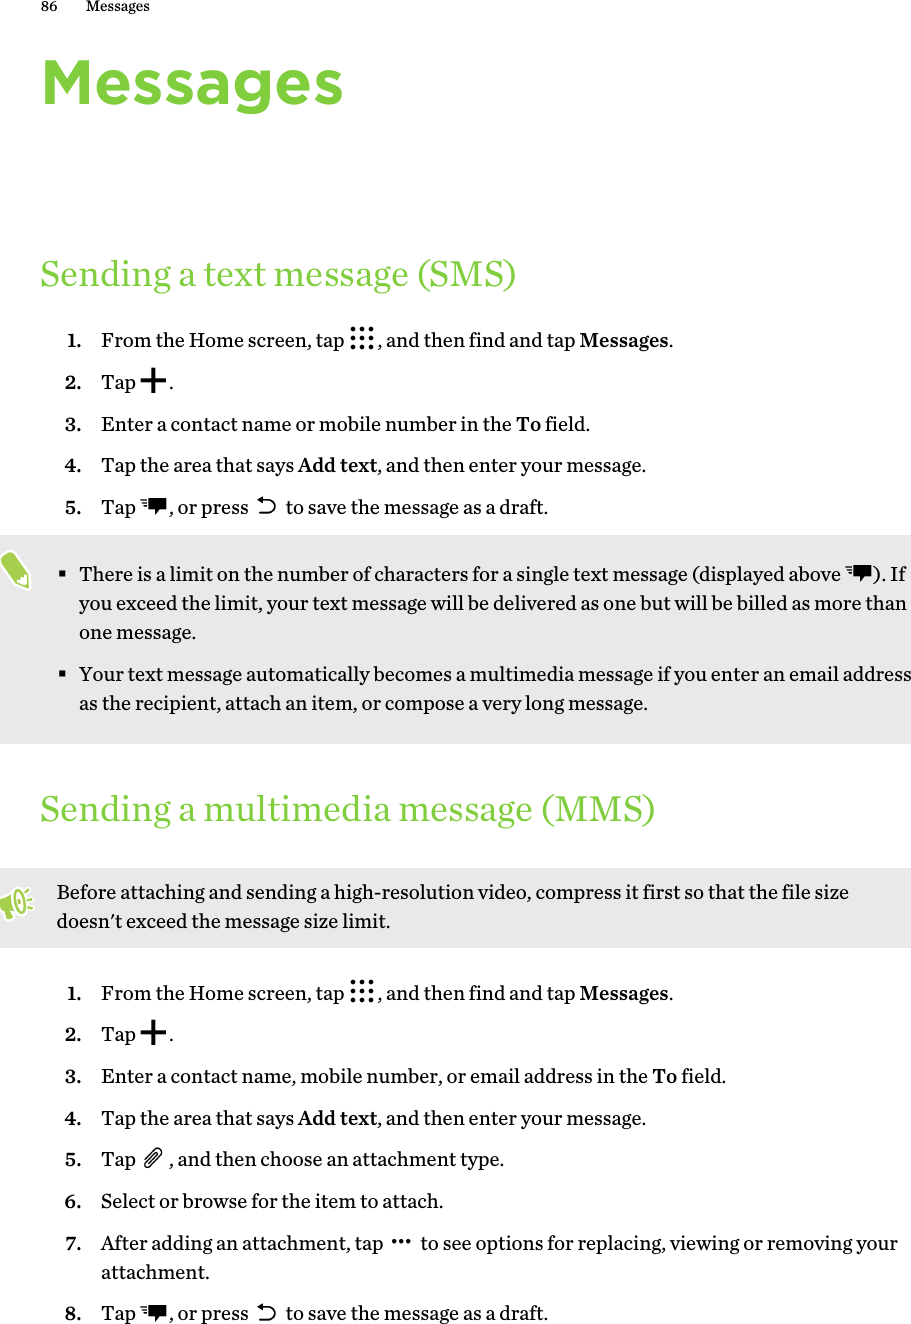 MessagesSending a text message (SMS)1. From the Home screen, tap  , and then find and tap Messages.2. Tap  .3. Enter a contact name or mobile number in the To field.4. Tap the area that says Add text, and then enter your message.5. Tap  , or press   to save the message as a draft. §There is a limit on the number of characters for a single text message (displayed above  ). Ifyou exceed the limit, your text message will be delivered as one but will be billed as more thanone message.§Your text message automatically becomes a multimedia message if you enter an email addressas the recipient, attach an item, or compose a very long message.Sending a multimedia message (MMS)Before attaching and sending a high-resolution video, compress it first so that the file sizedoesn&apos;t exceed the message size limit.1. From the Home screen, tap  , and then find and tap Messages.2. Tap  .3. Enter a contact name, mobile number, or email address in the To field.4. Tap the area that says Add text, and then enter your message.5. Tap  , and then choose an attachment type.6. Select or browse for the item to attach.7. After adding an attachment, tap   to see options for replacing, viewing or removing yourattachment.8. Tap  , or press   to save the message as a draft.86 Messages